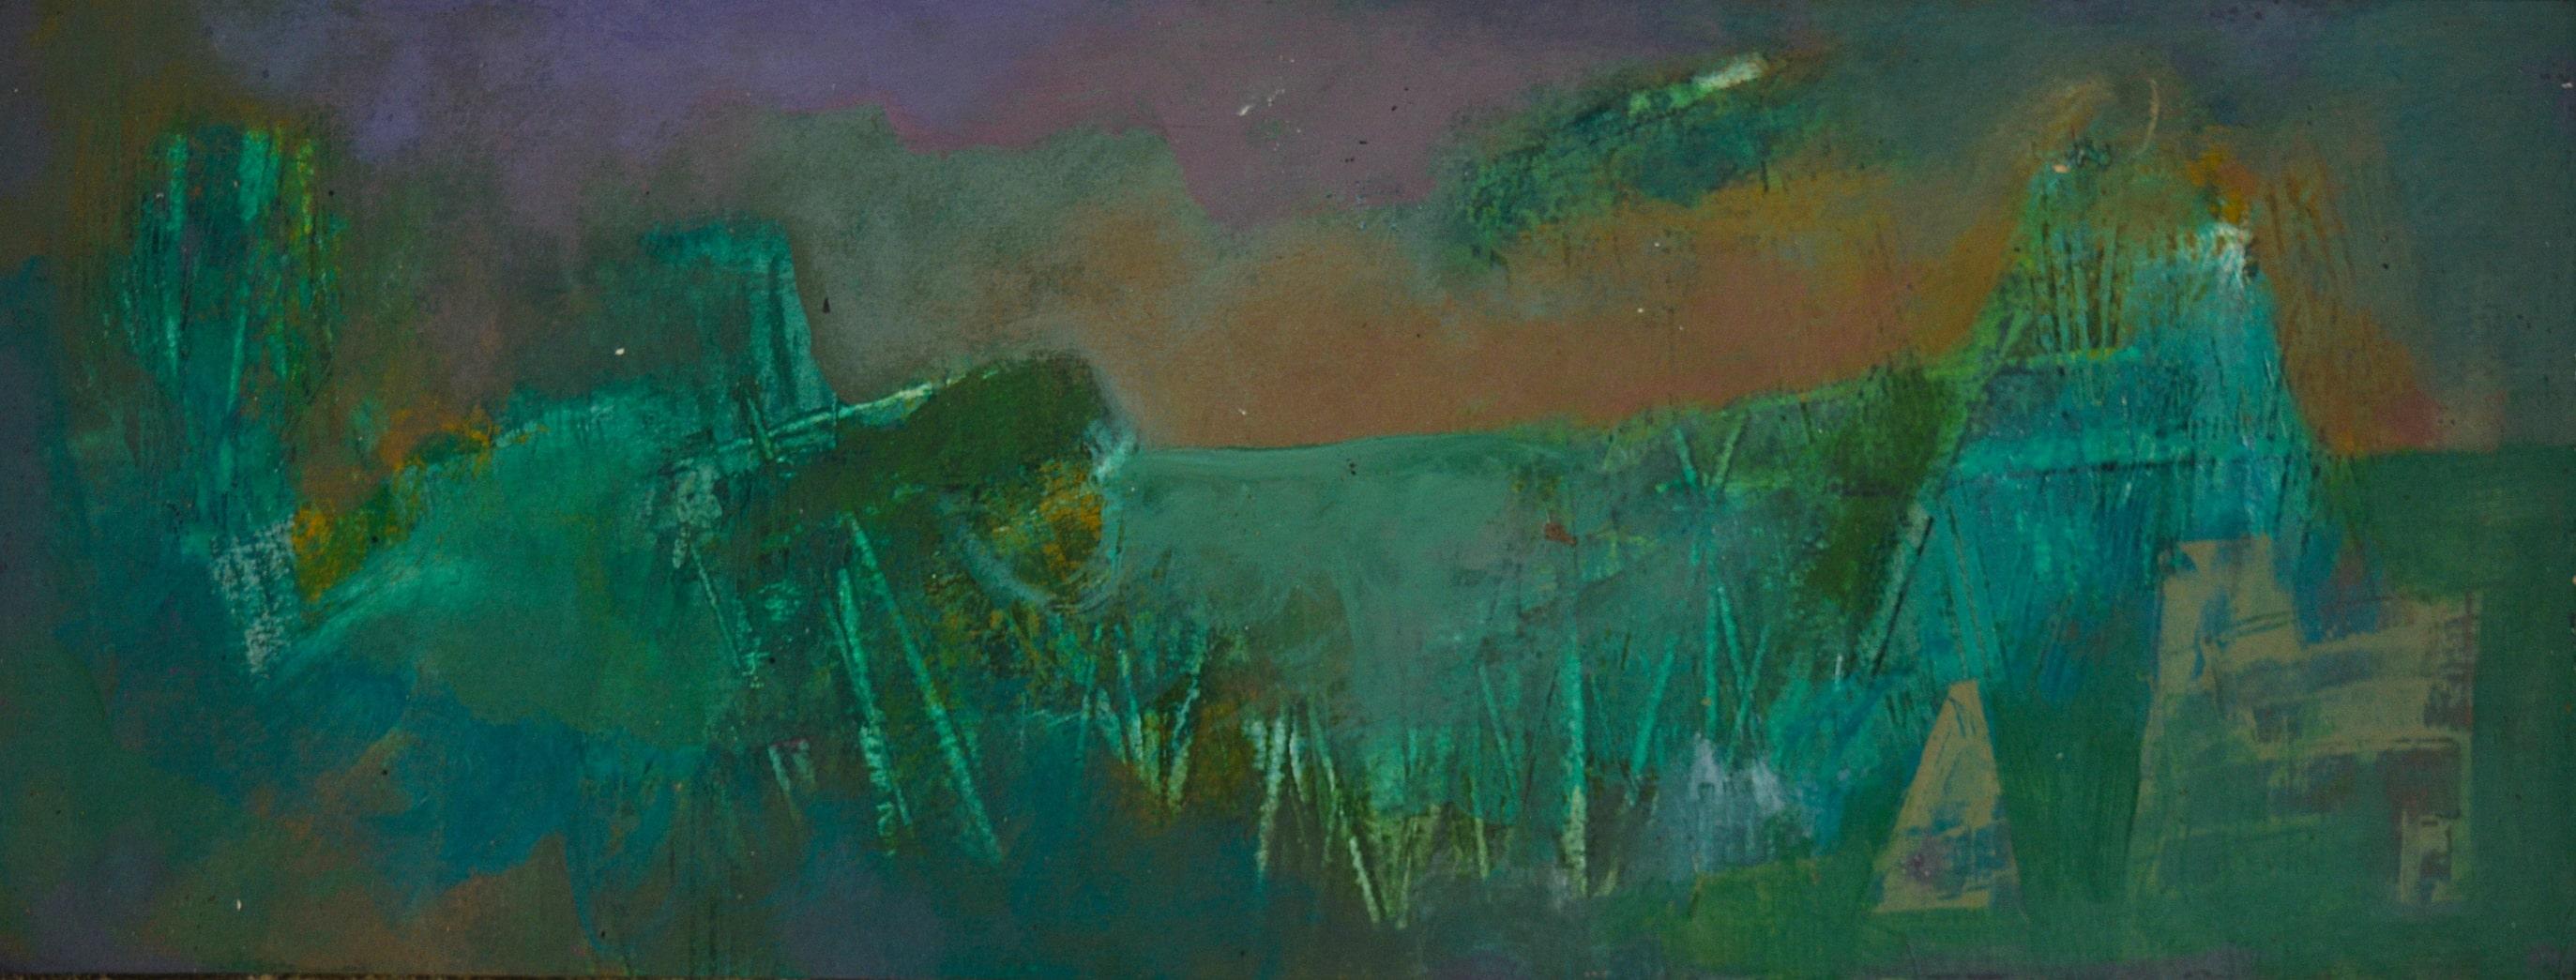 Landscape, Acrylic on Archival Paper by Contemporary Artist “In Stock”